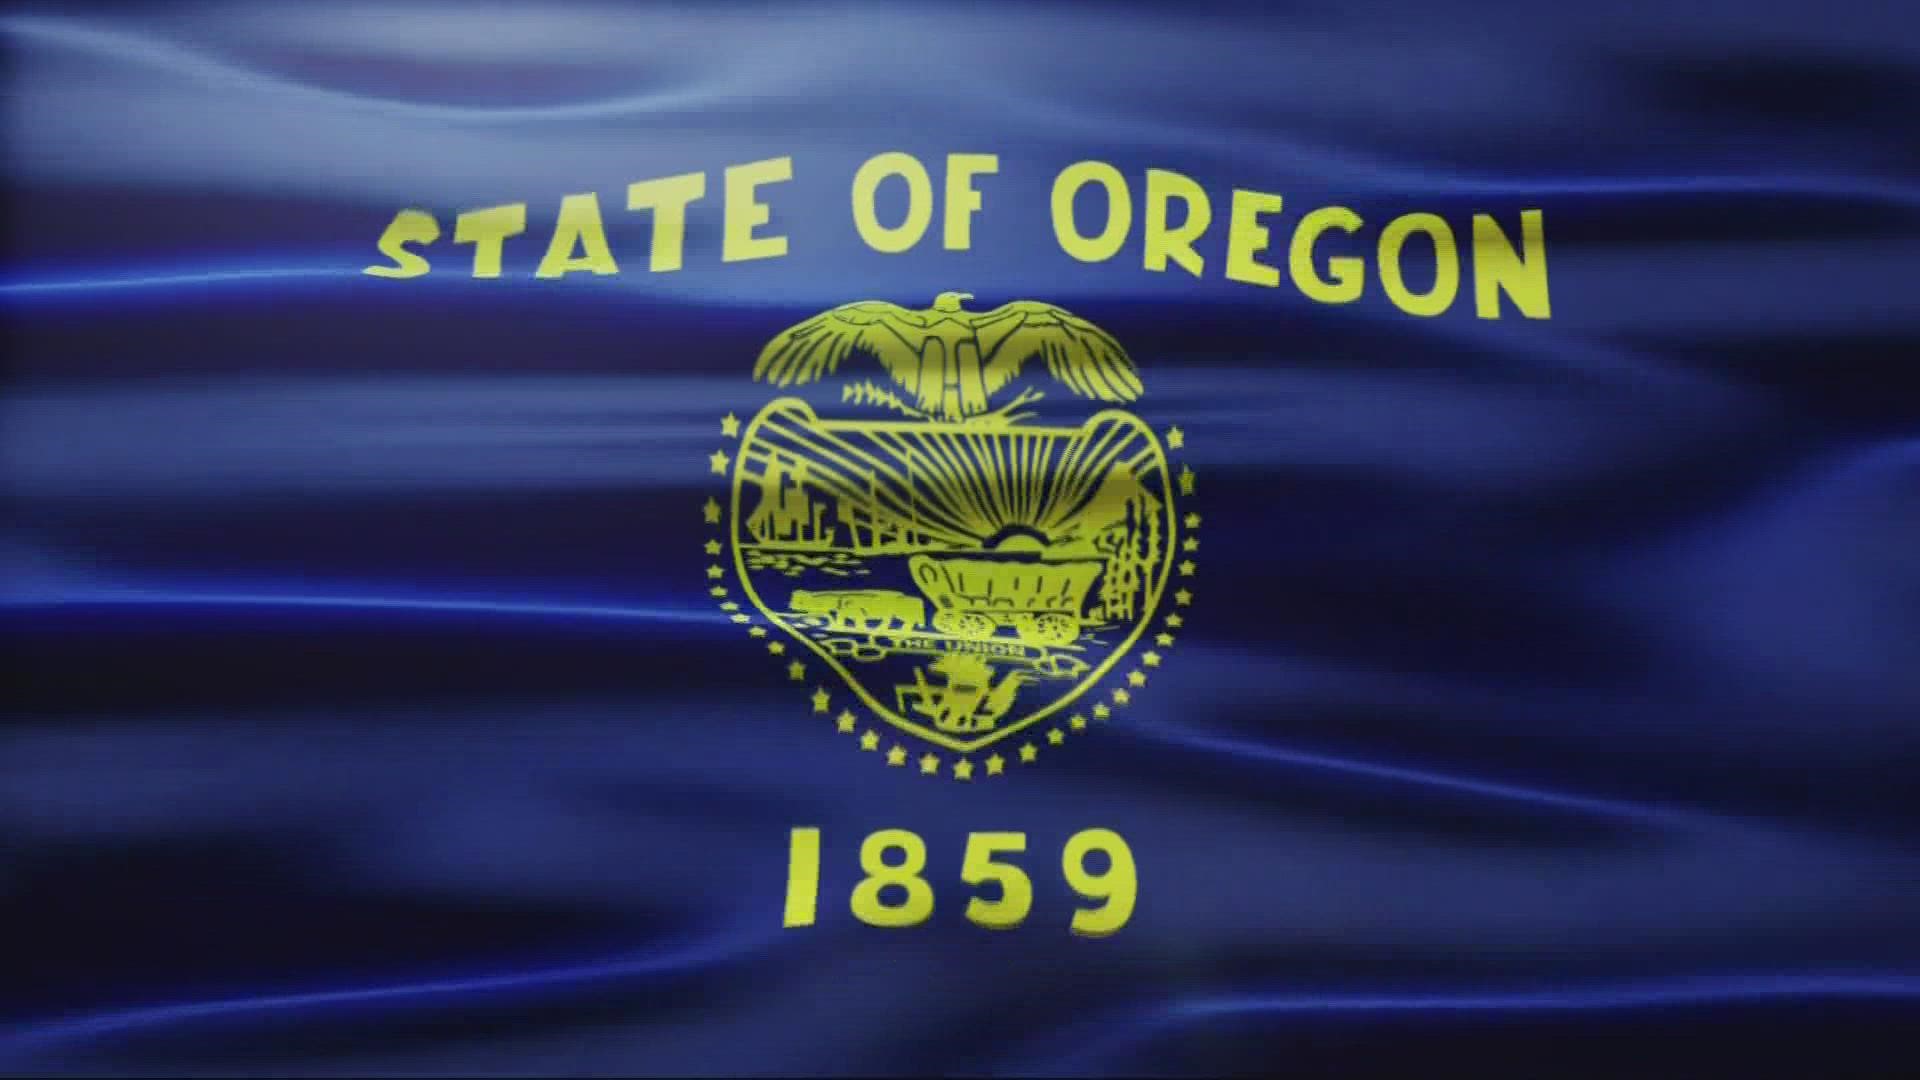 The origin behind Oregon's name remains a mystery. KGW Sunrise's Devon Haskins explains some of the theories about how the state got its name.